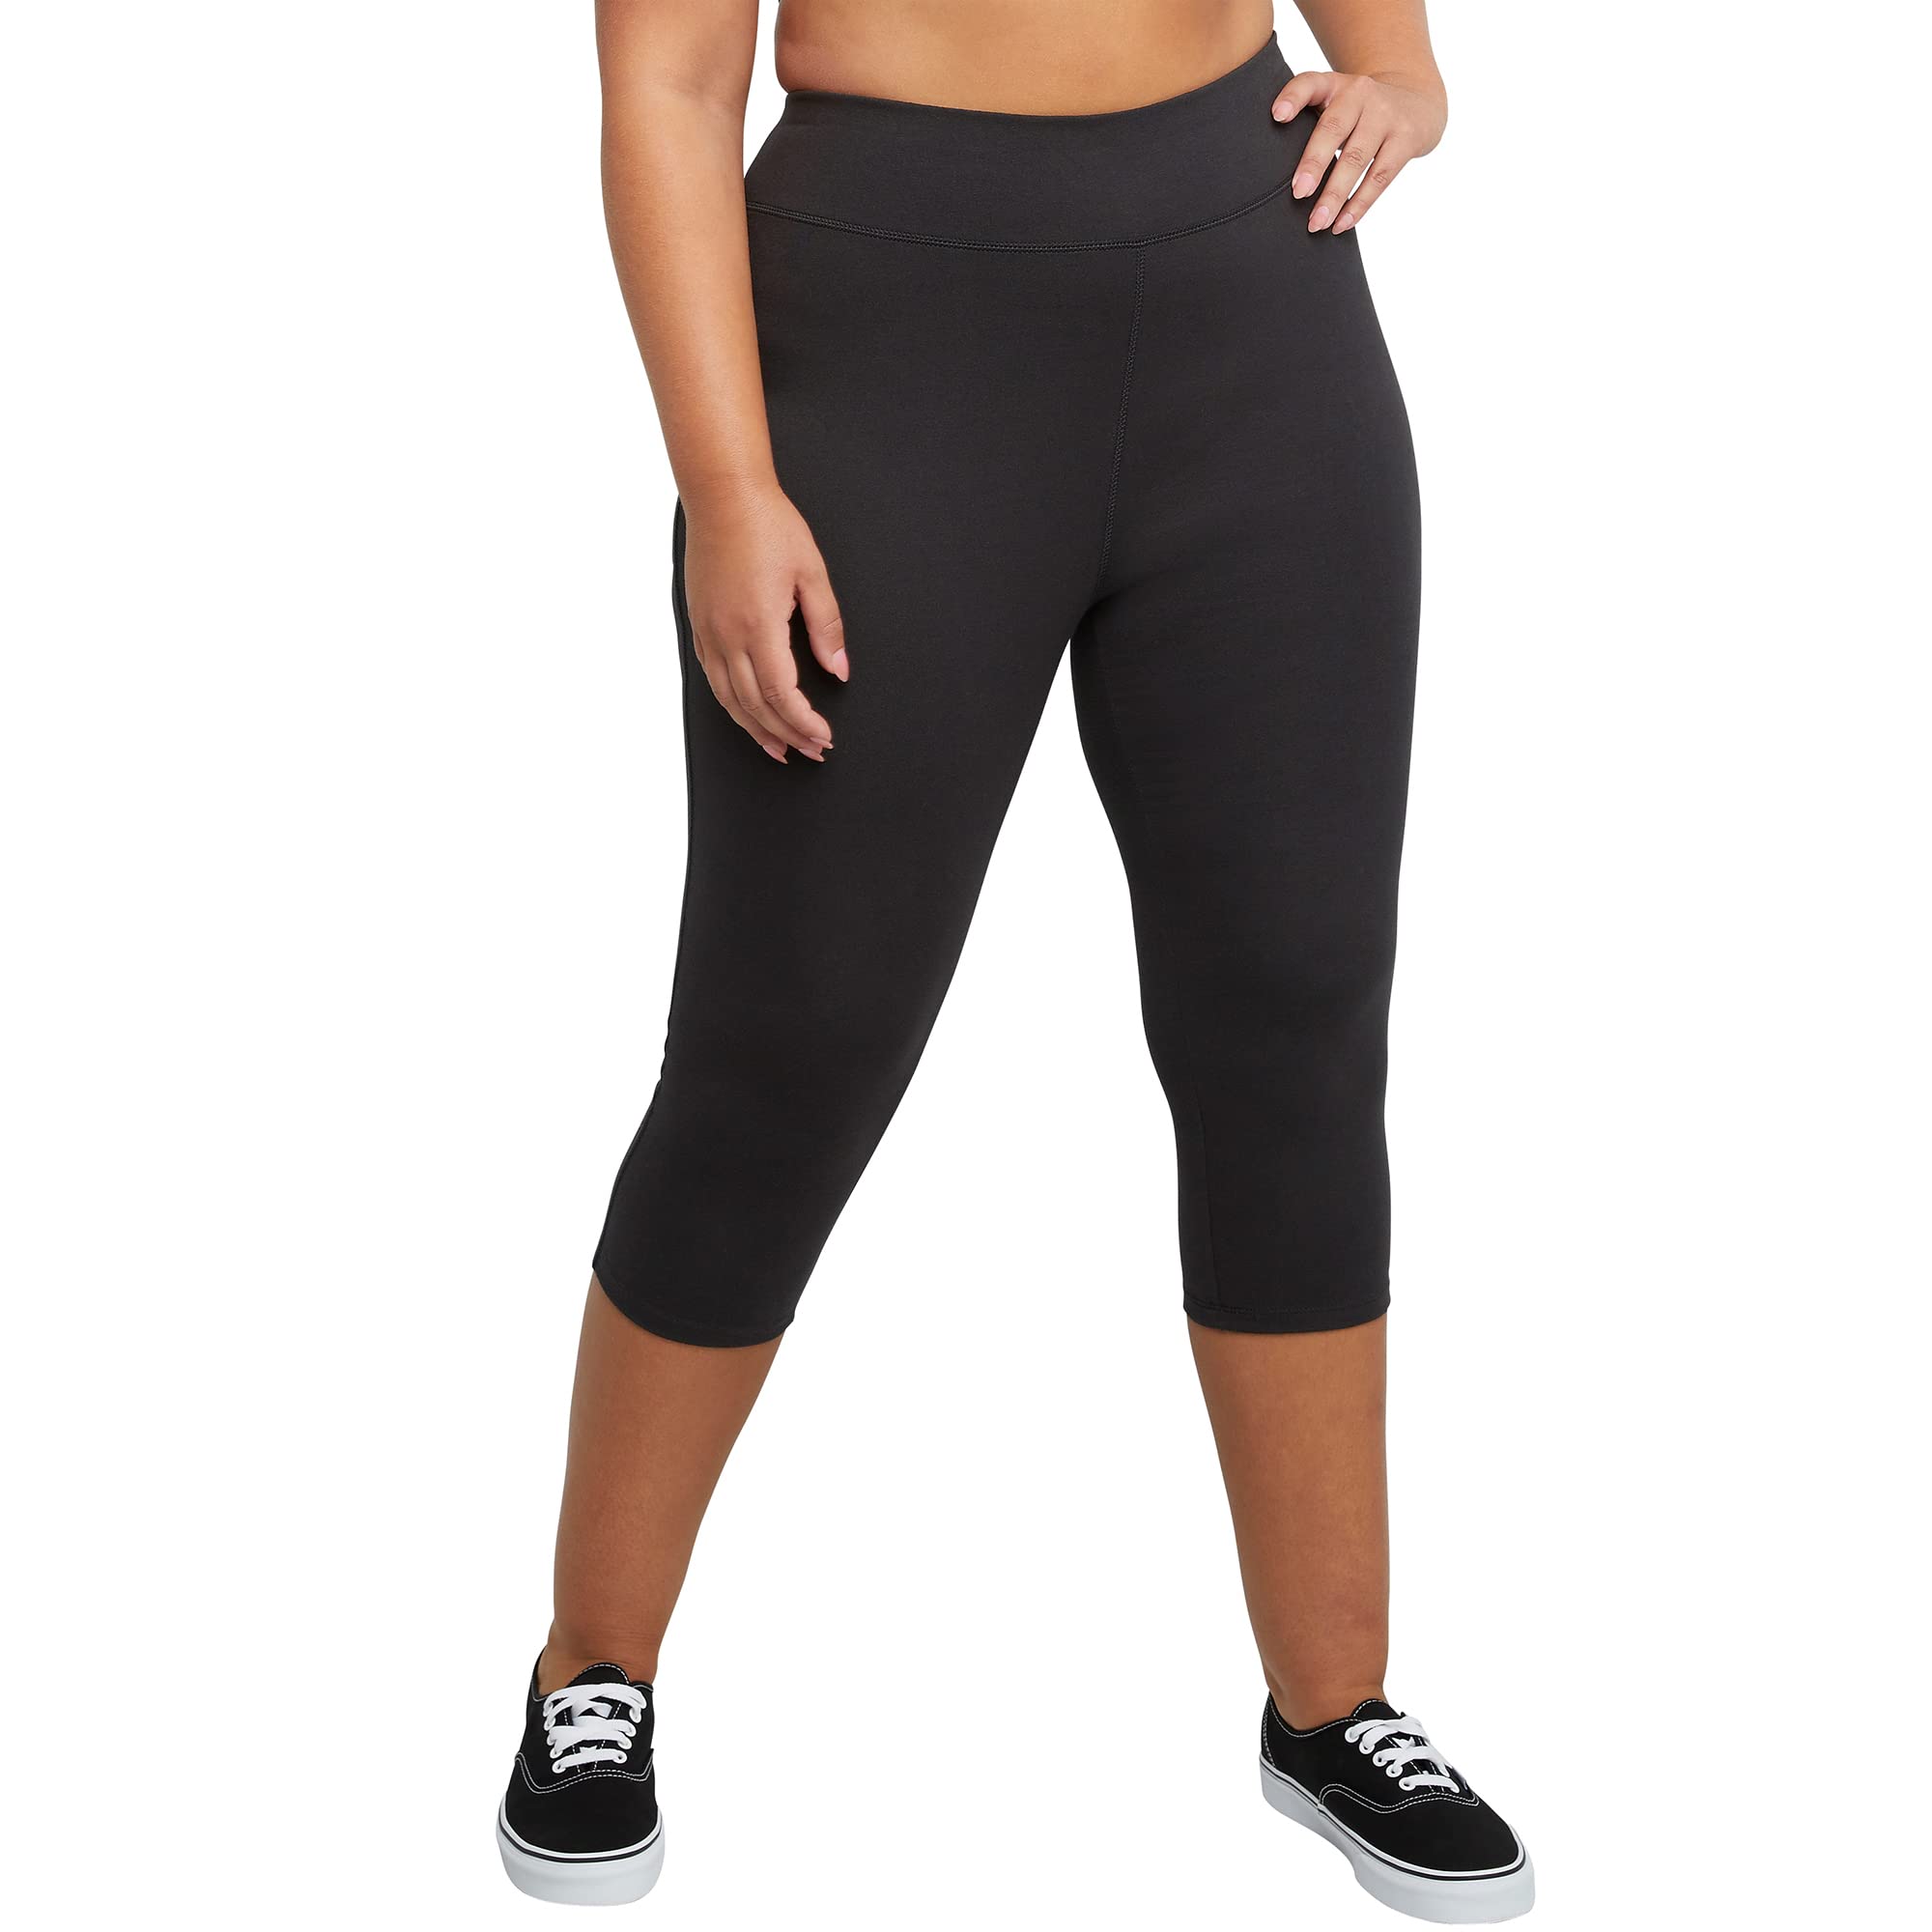 Buy Just My Size Women's French Terry Capri, Black, 2X at